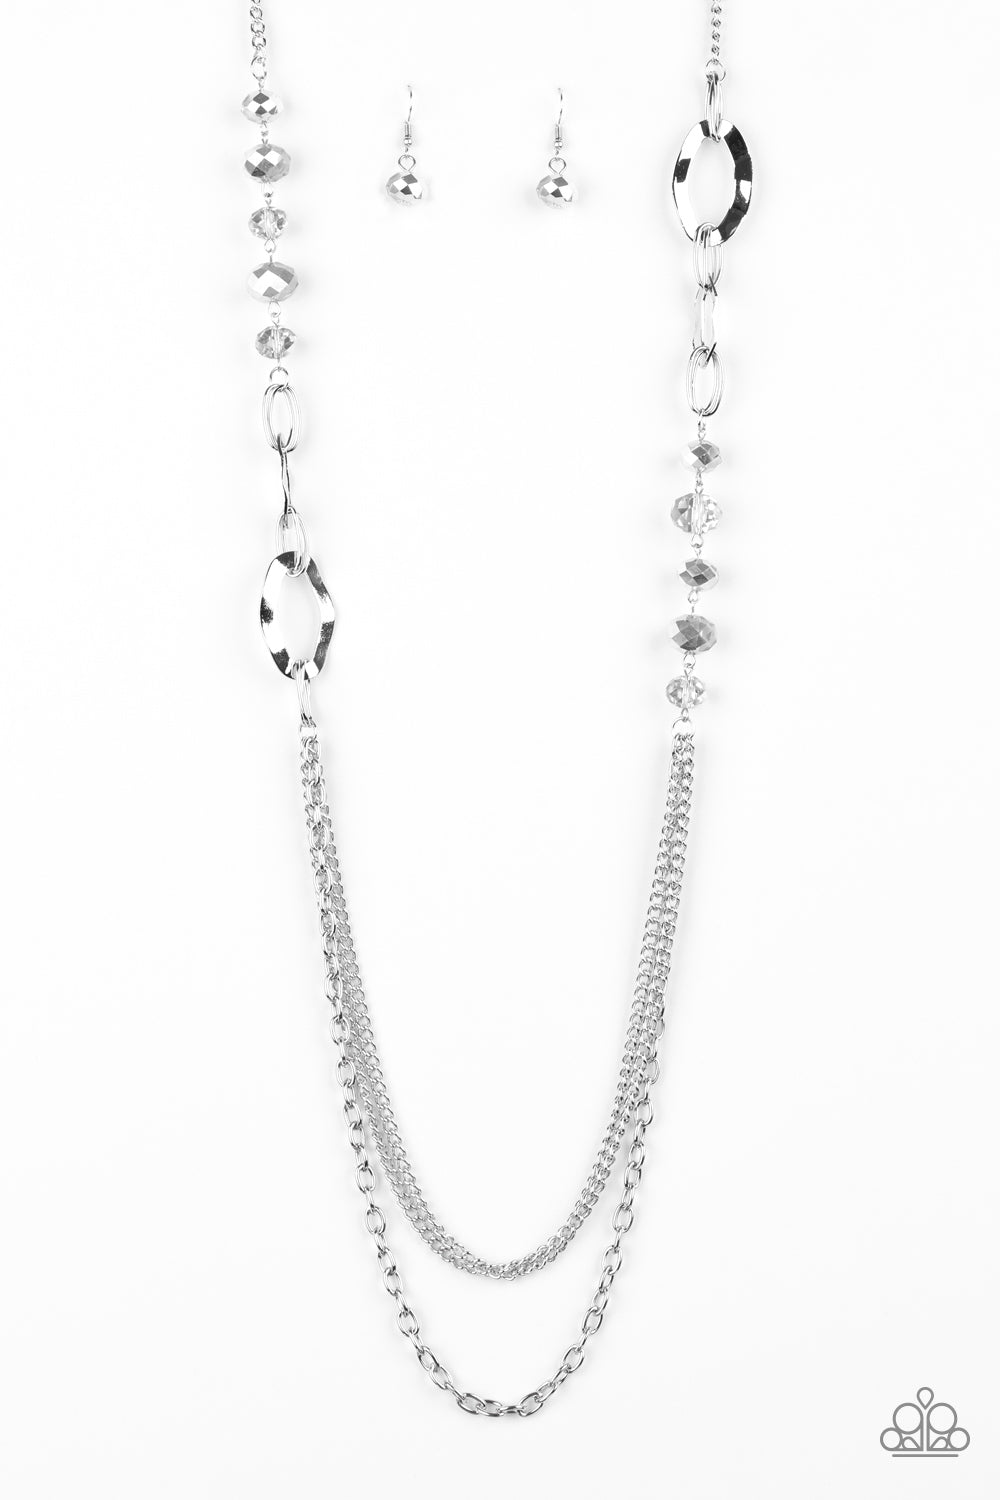 Paparazzi necklace - Modern Girl Glam - Silver